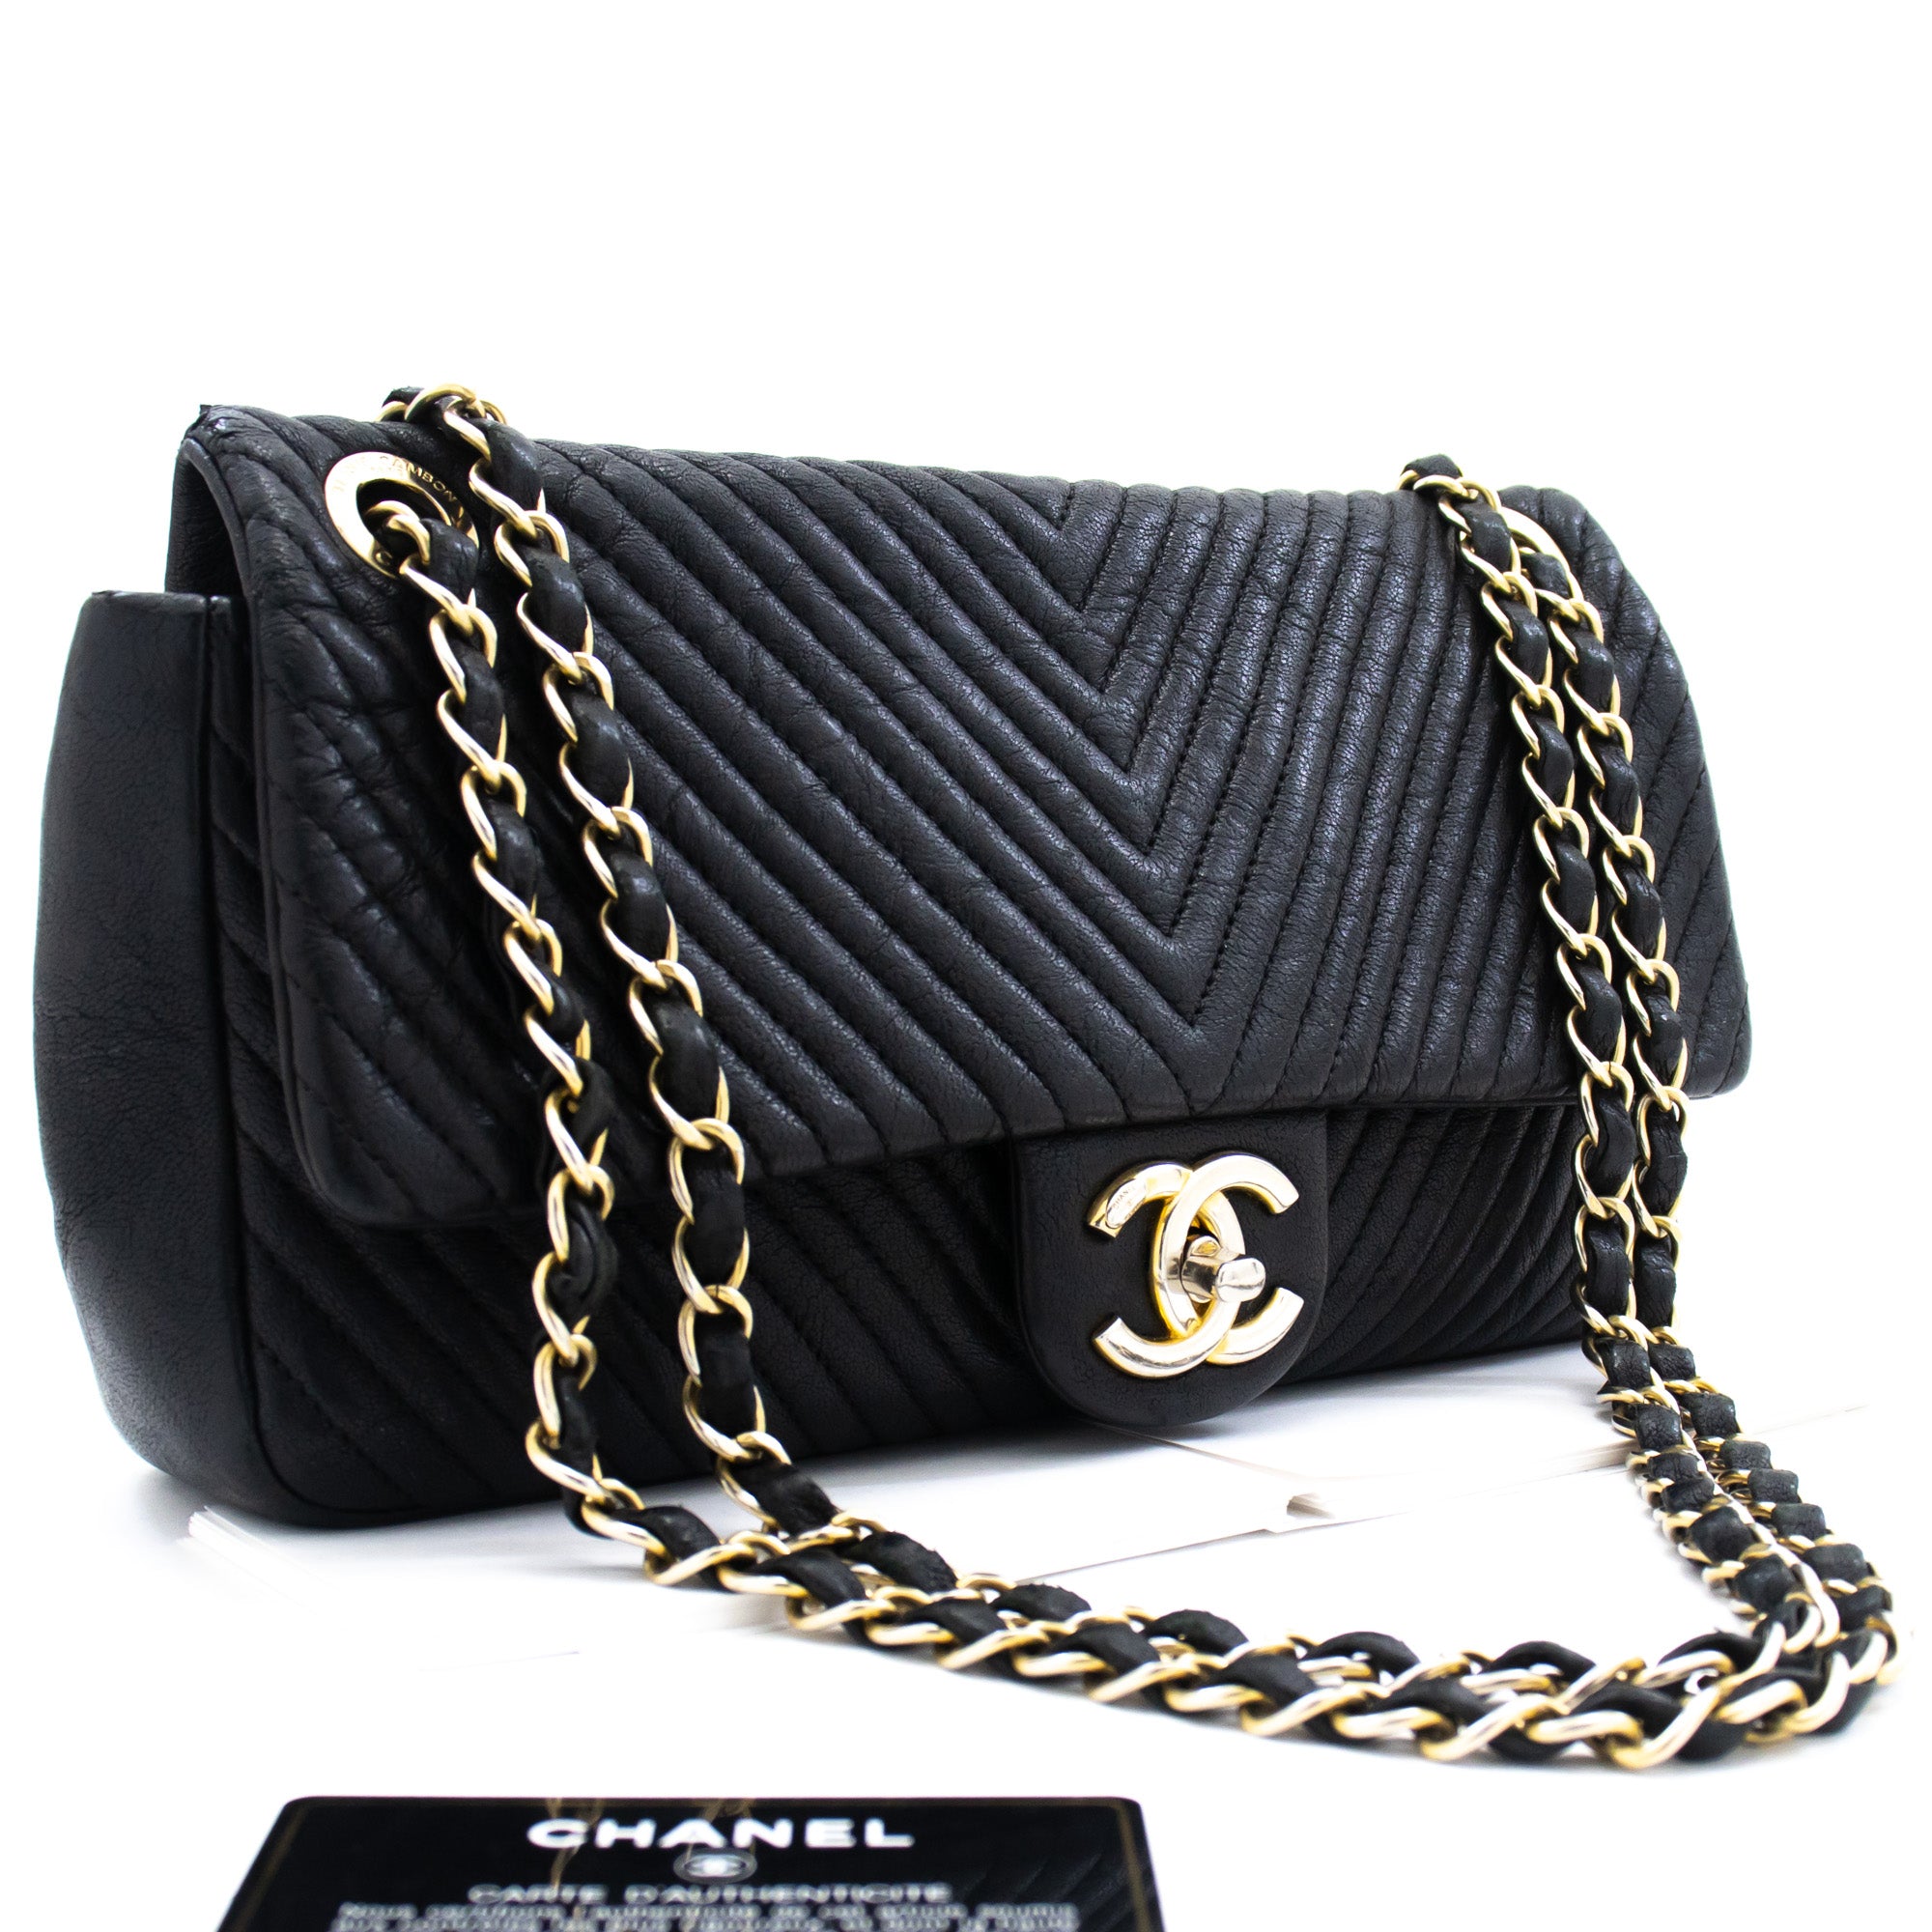 Auth Chanel Wrinkled Lamb Skin Leather Chevron Quilted Surpique